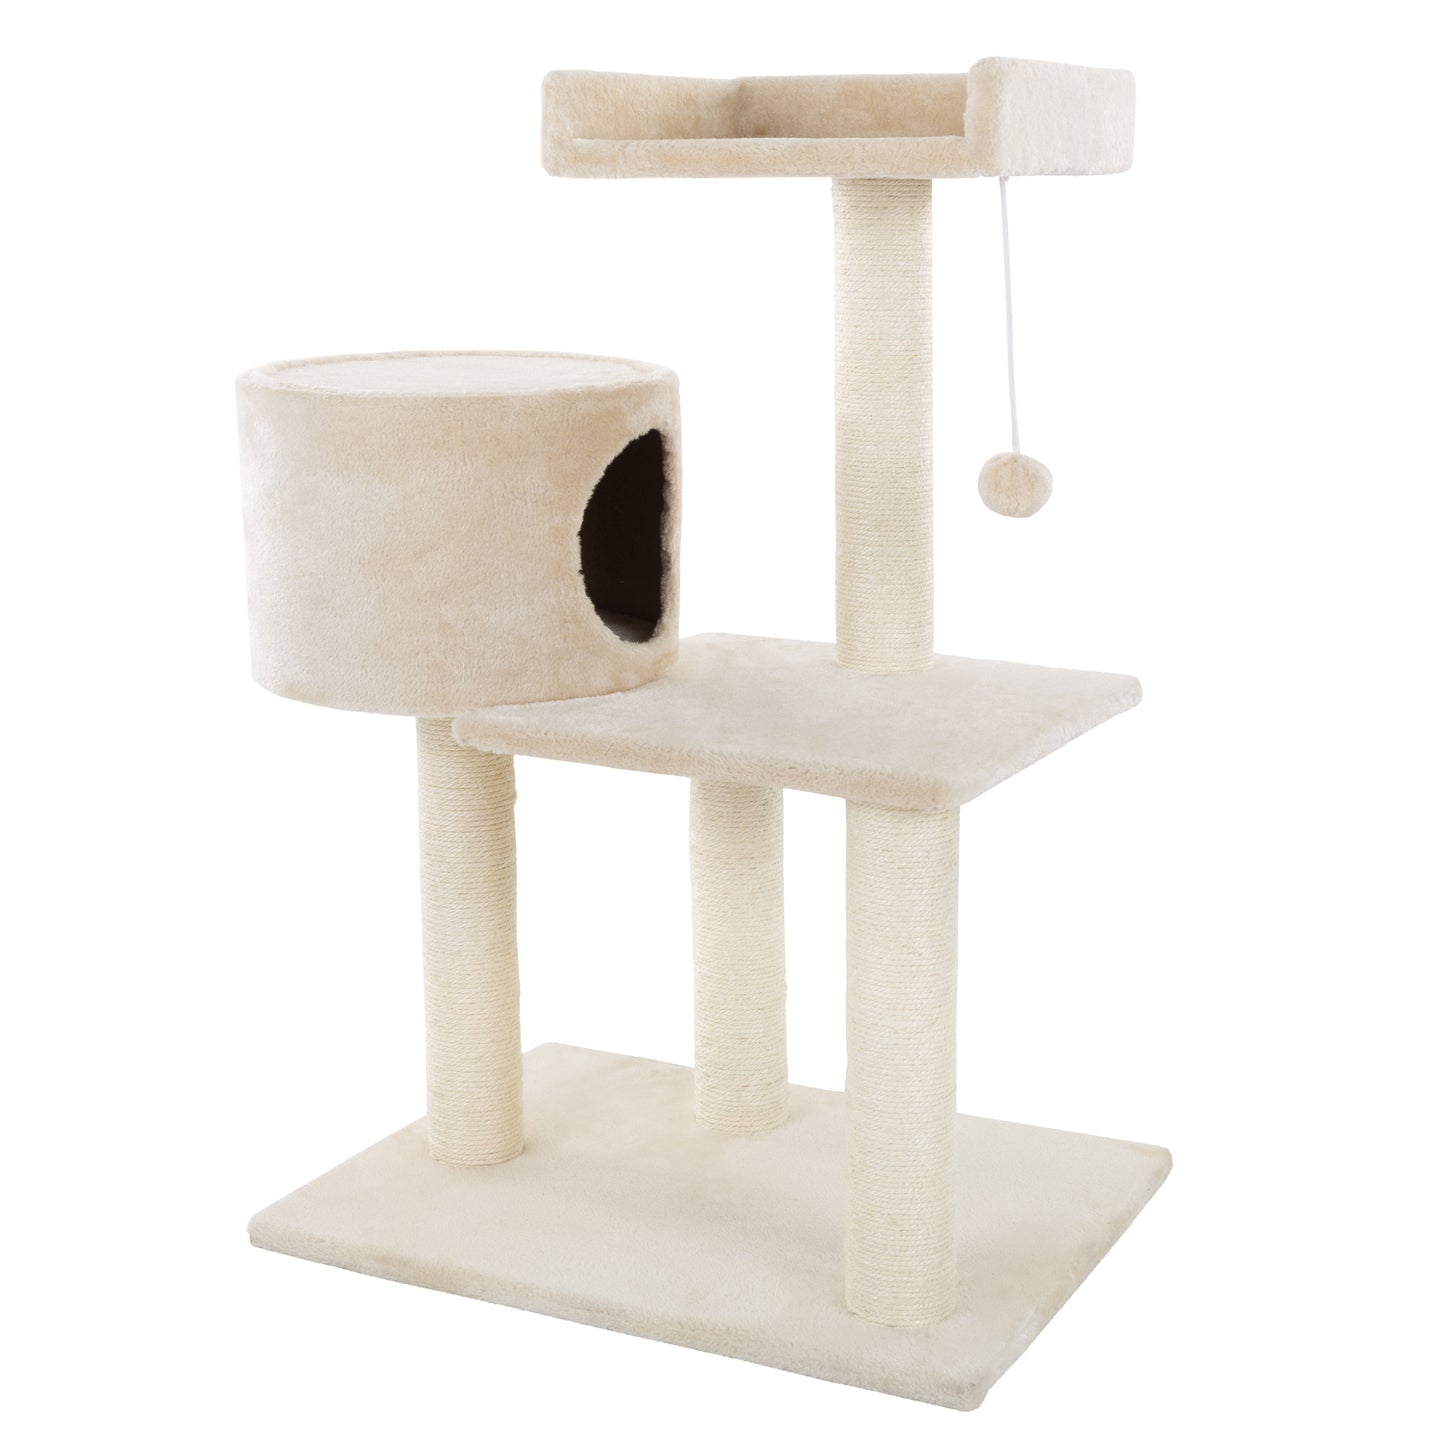 3-Tier Cat Tree With Condo And Scratching Posts